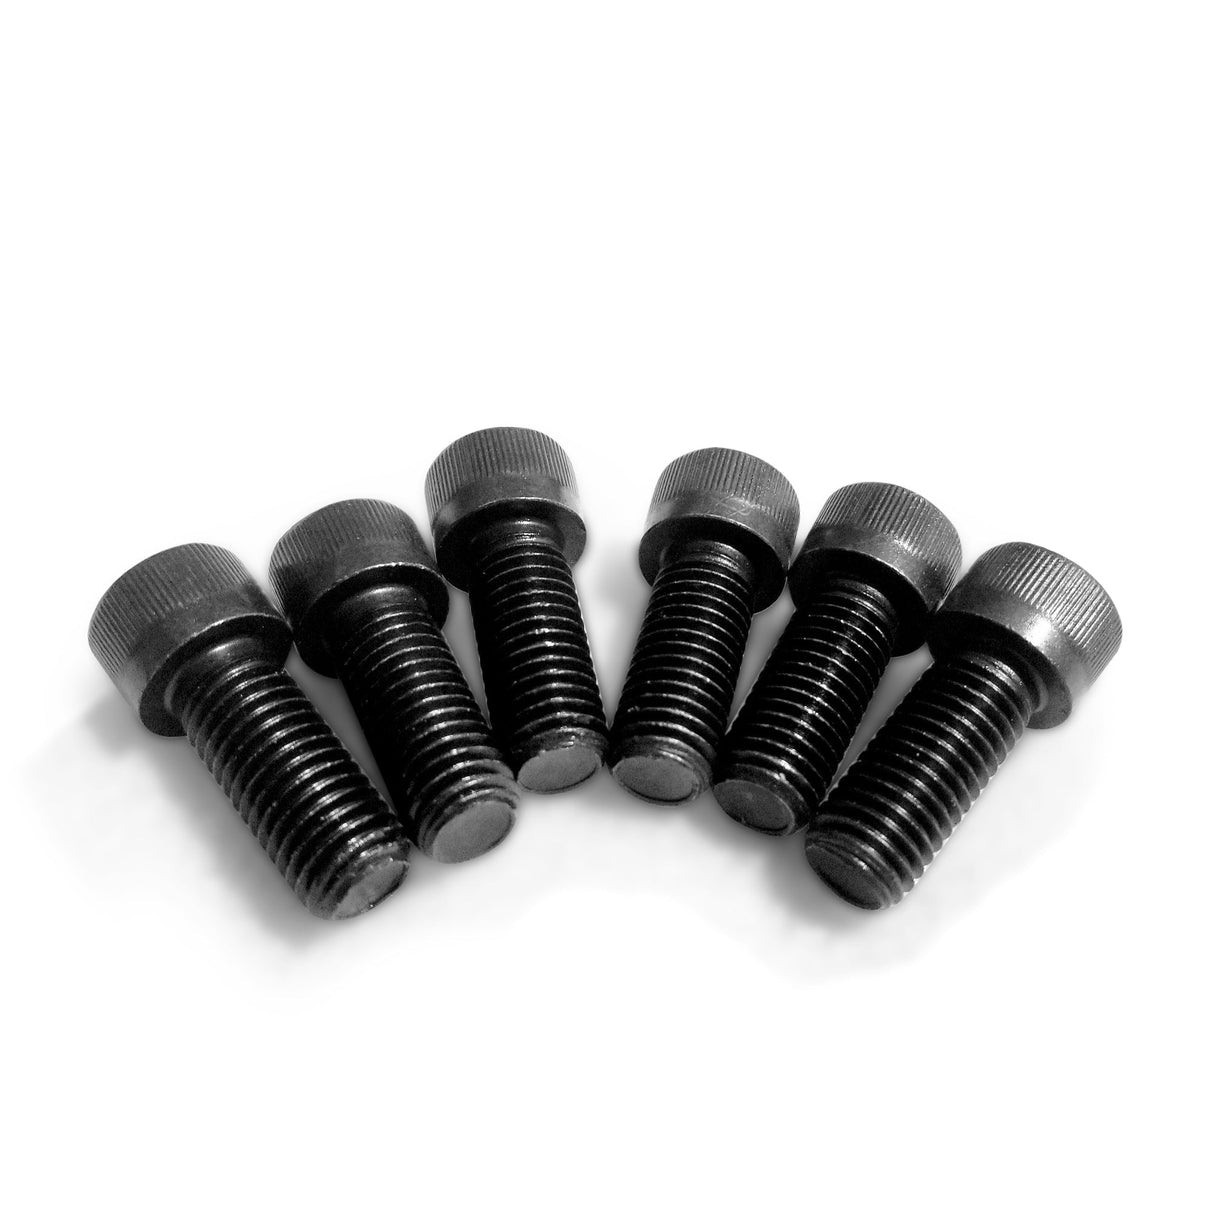 TURNER M16 x 40 MM Bolts for Kitagawa (B-212), Samchully, Strong T-Nuts (6 Pack)